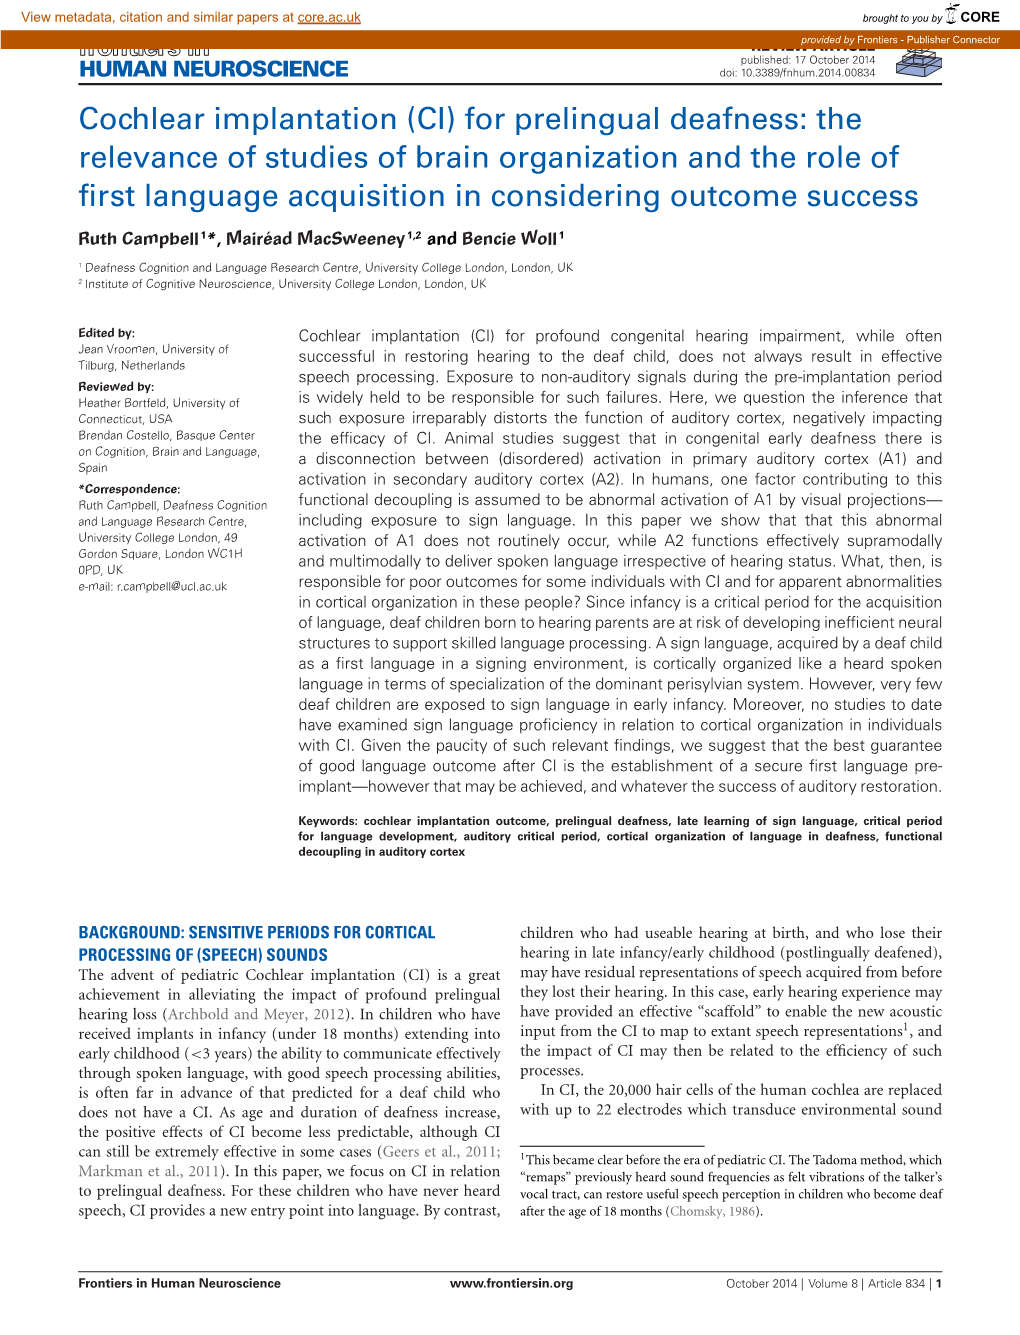 For Prelingual Deafness: the Relevance of Studies of Brain Organization and the Role of ﬁrst Language Acquisition in Considering Outcome Success